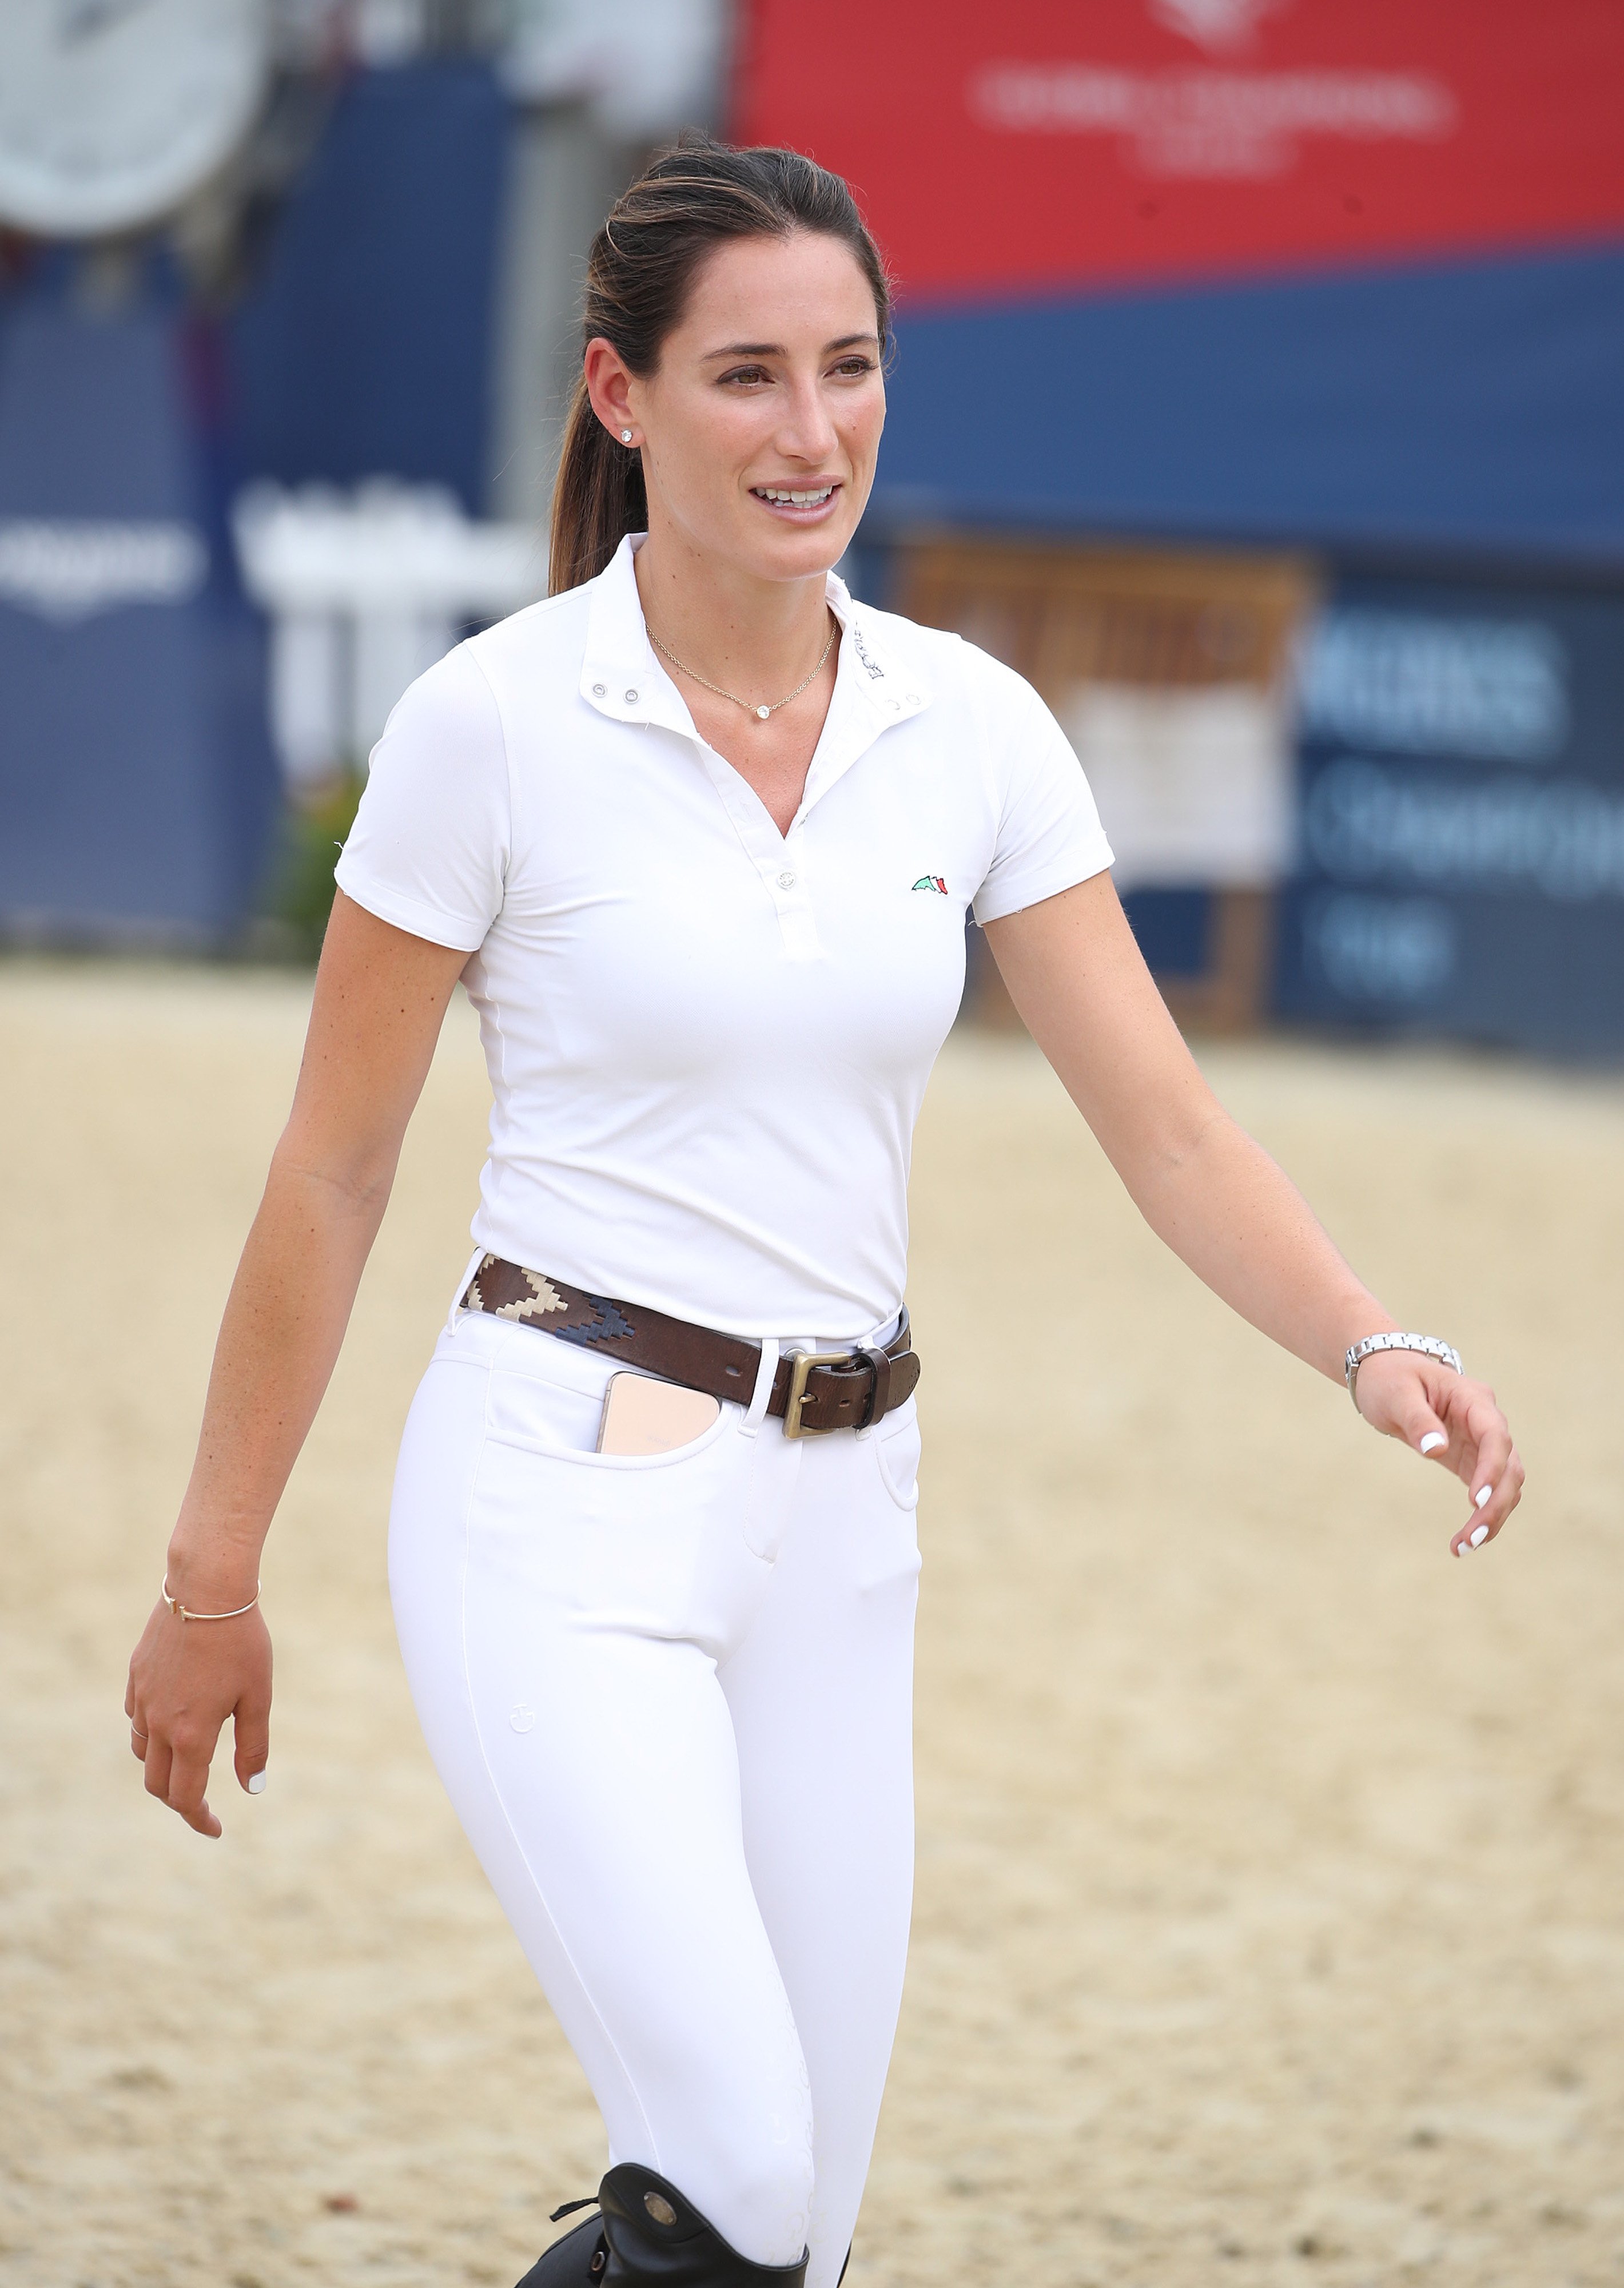 Jessica Springsteen at an equestrian competition in London